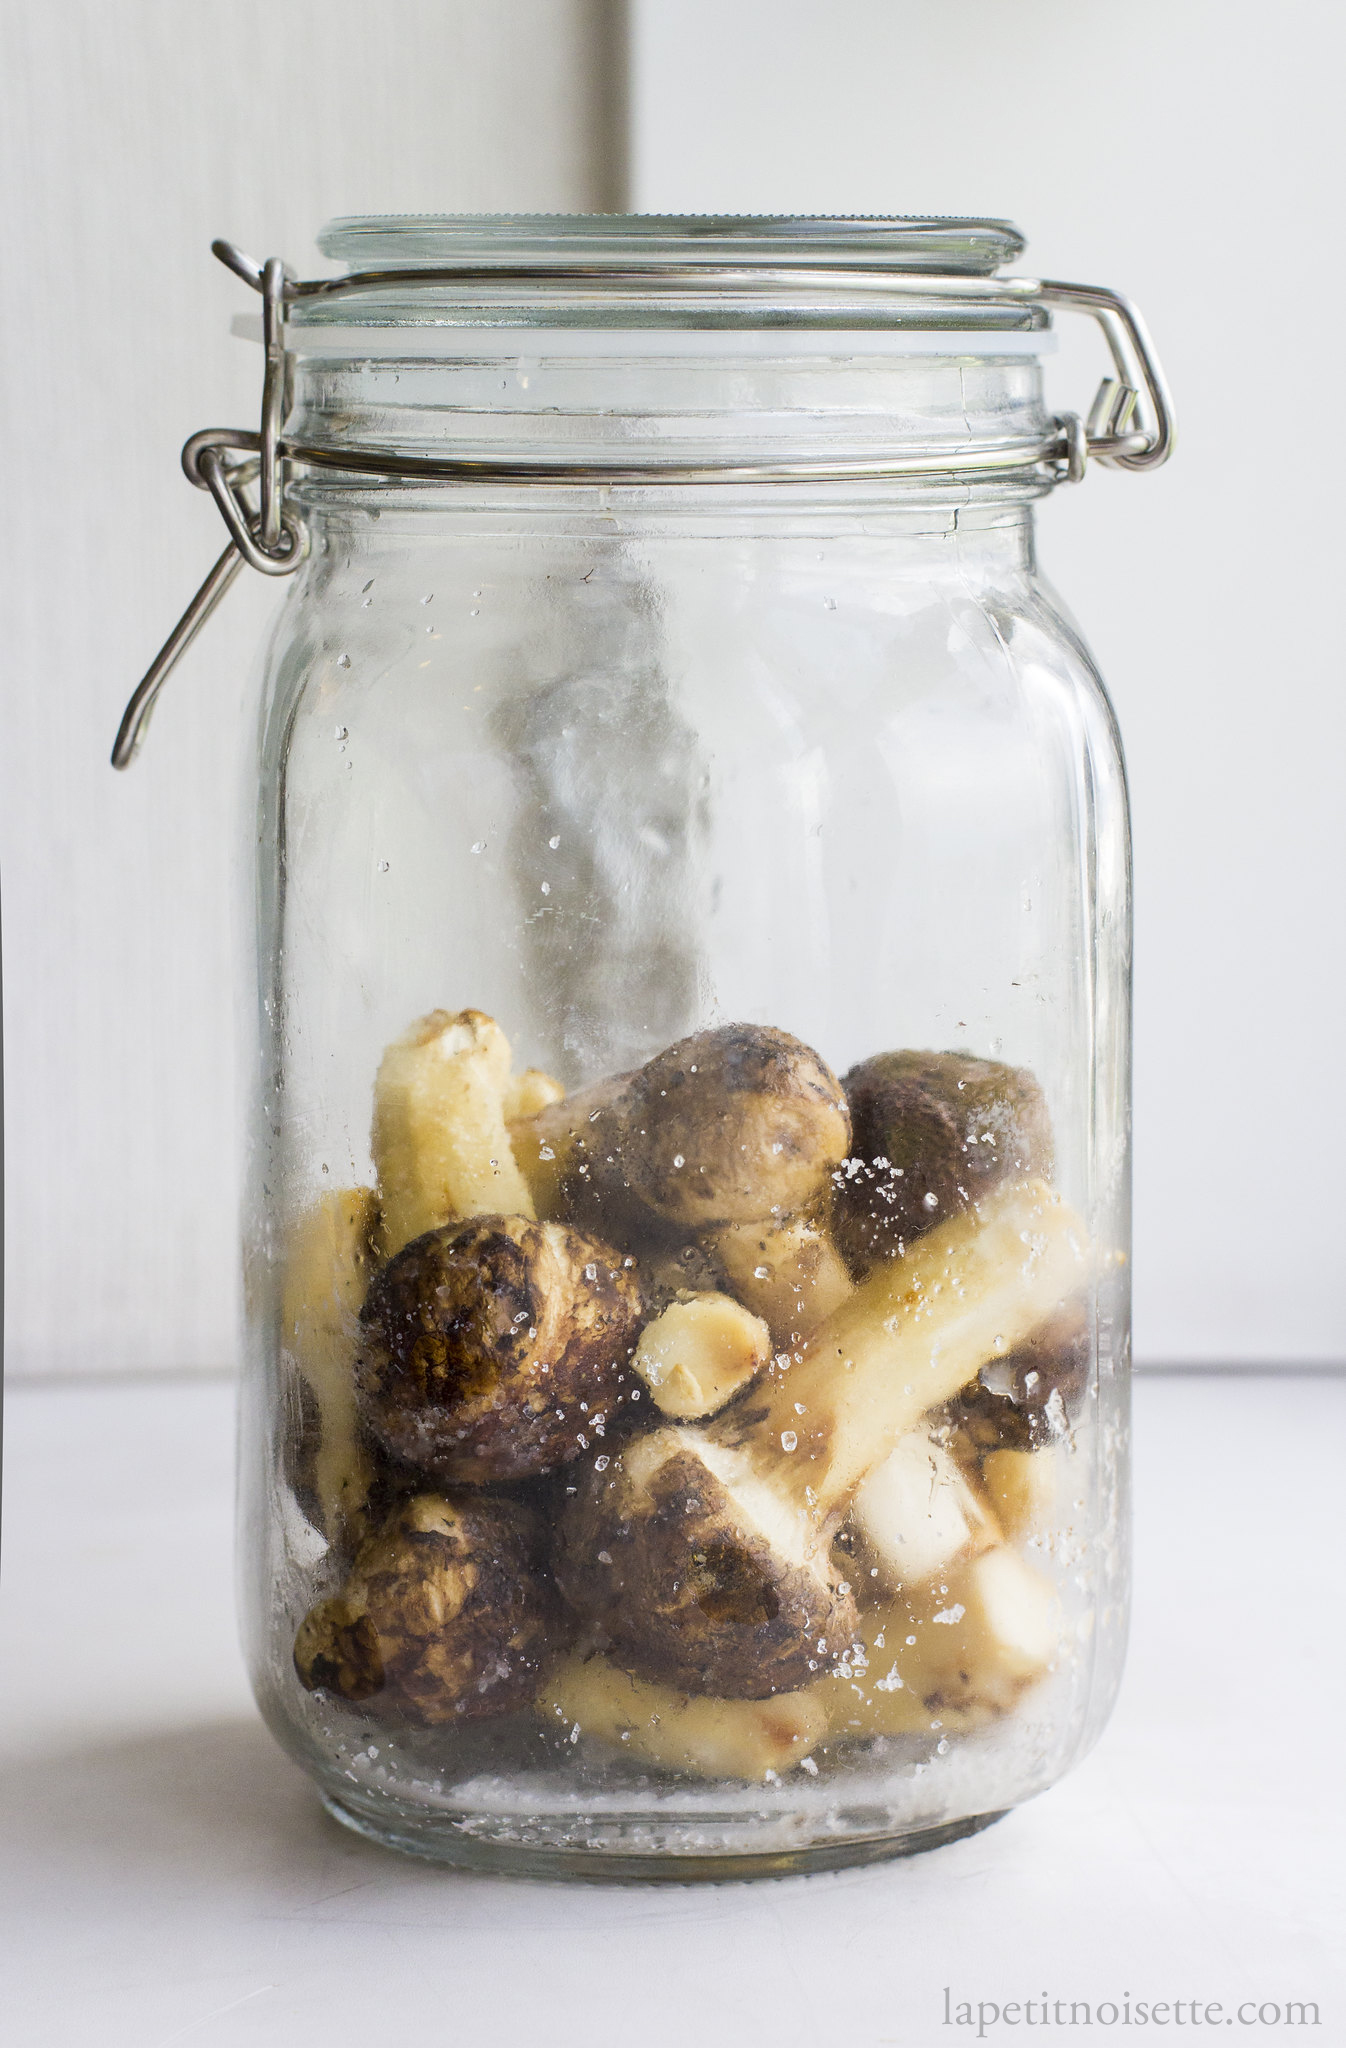 Matsutake mushrooms mixed with 2% salt in a jar ready to be fermented. 